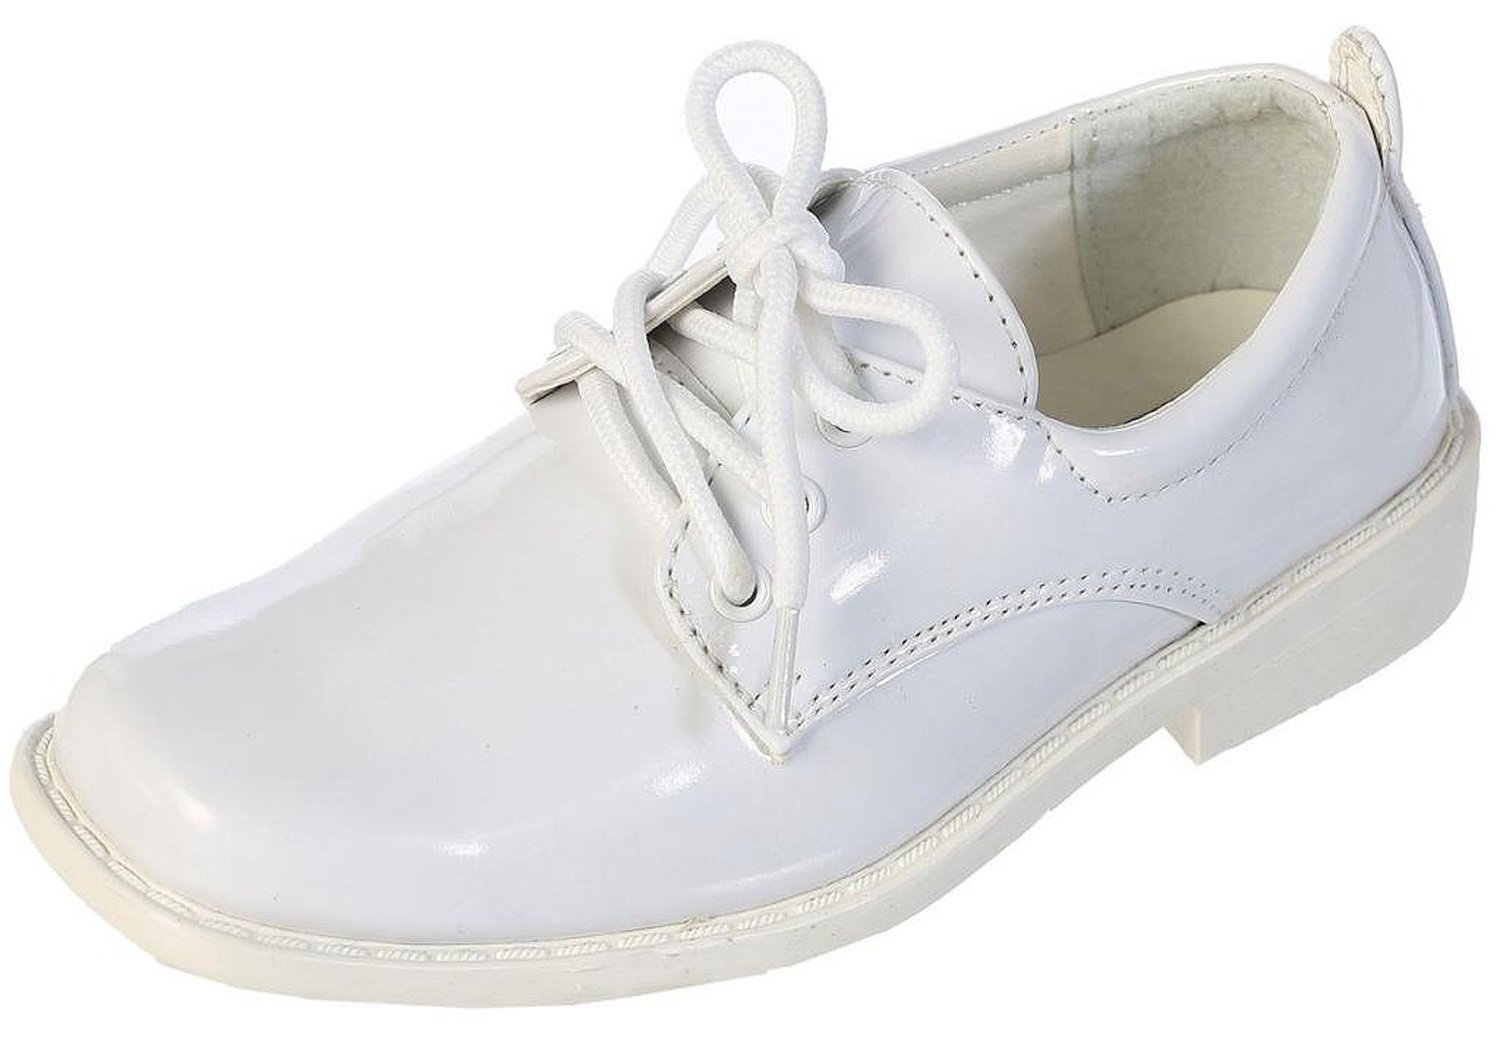 Boys Square Toe Lace Up Oxford Patent Dress Shoes - Available in White 11 Little Kid